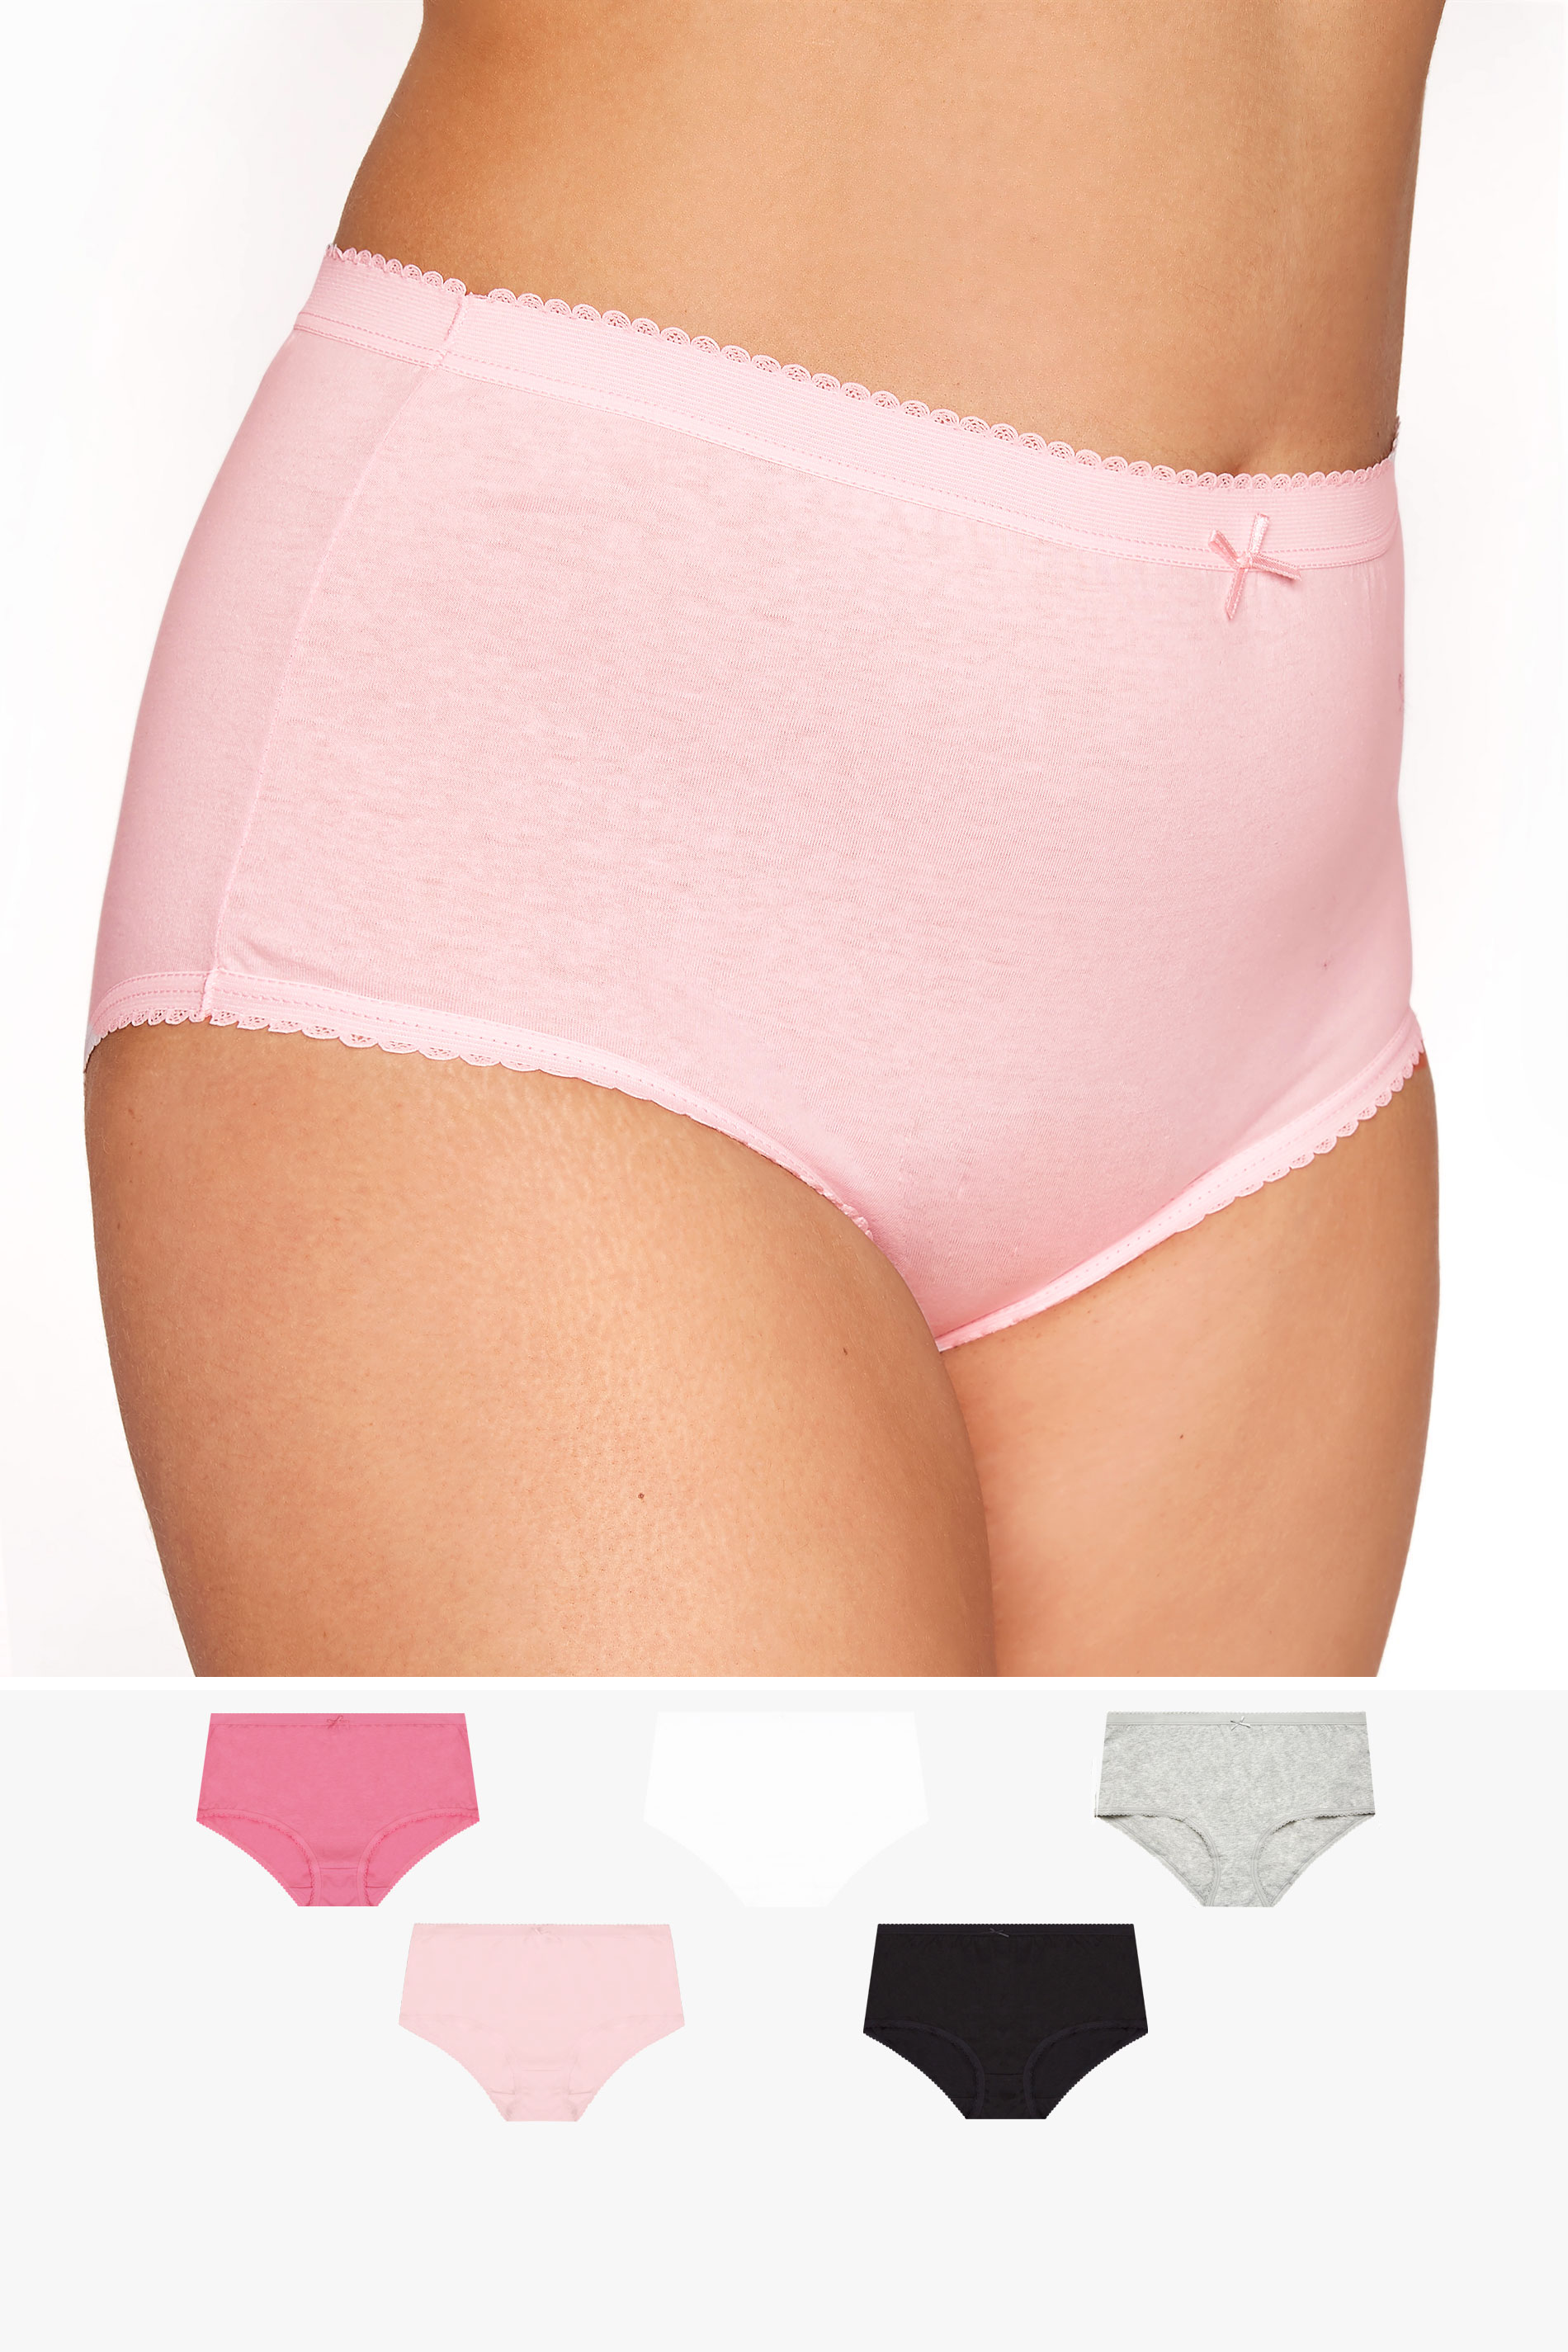 5 PACK Pink & Black Solid Colour High Waisted Full Briefs 1